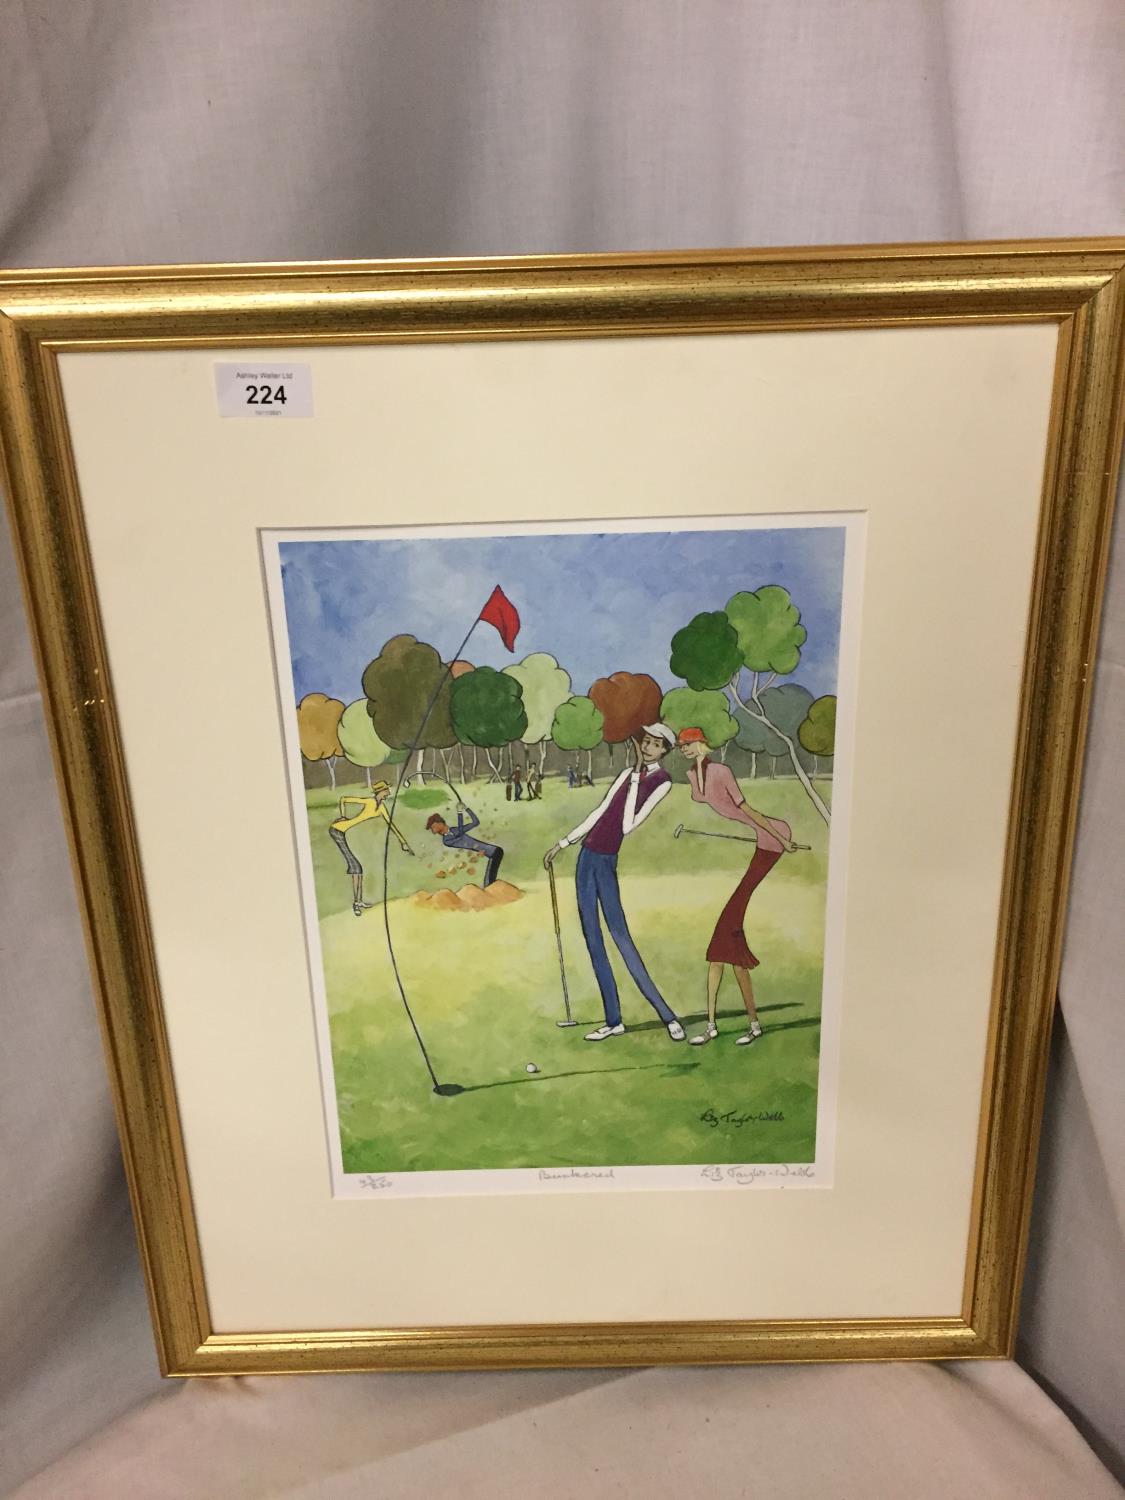 A GILT FRAMED LIMITED EDITION LIZ TAYLOR WEBB PICTURE 'BUNKERED' PENCIL SIGNED TO LOWER RIGHT HAND